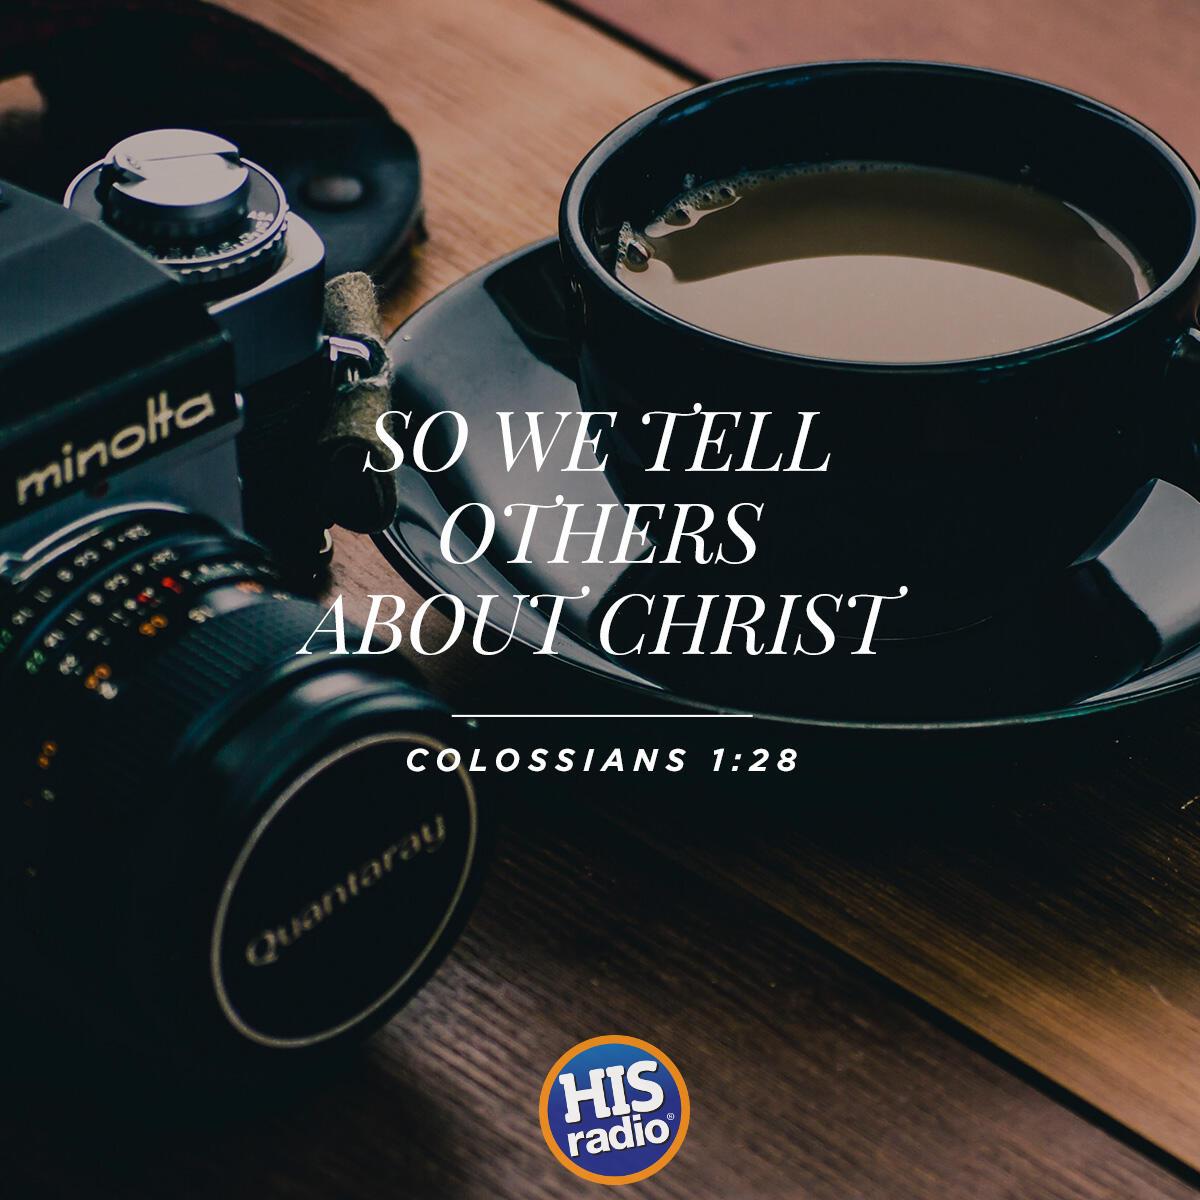 Colossians 1:28 - Verse of the Day